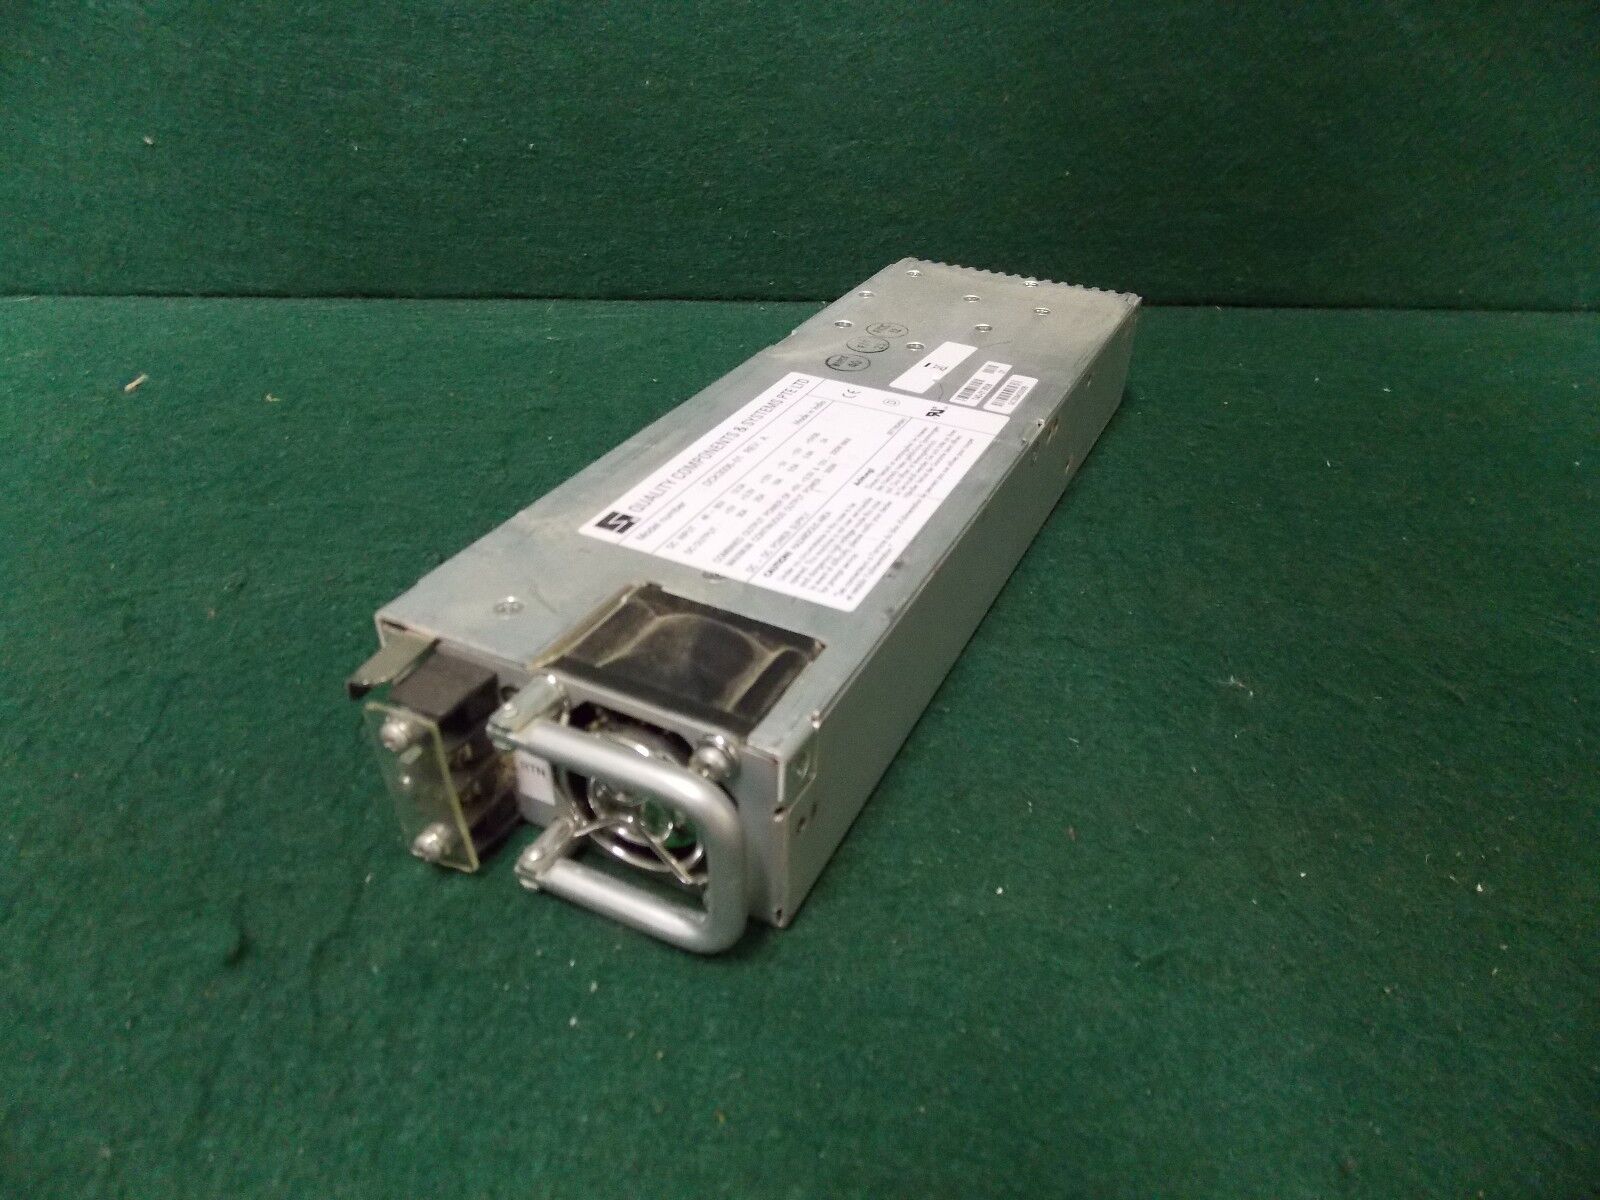 Juniper J6300-PWR-DC-S DC Power Supply for J6300 Router 740-013658 #